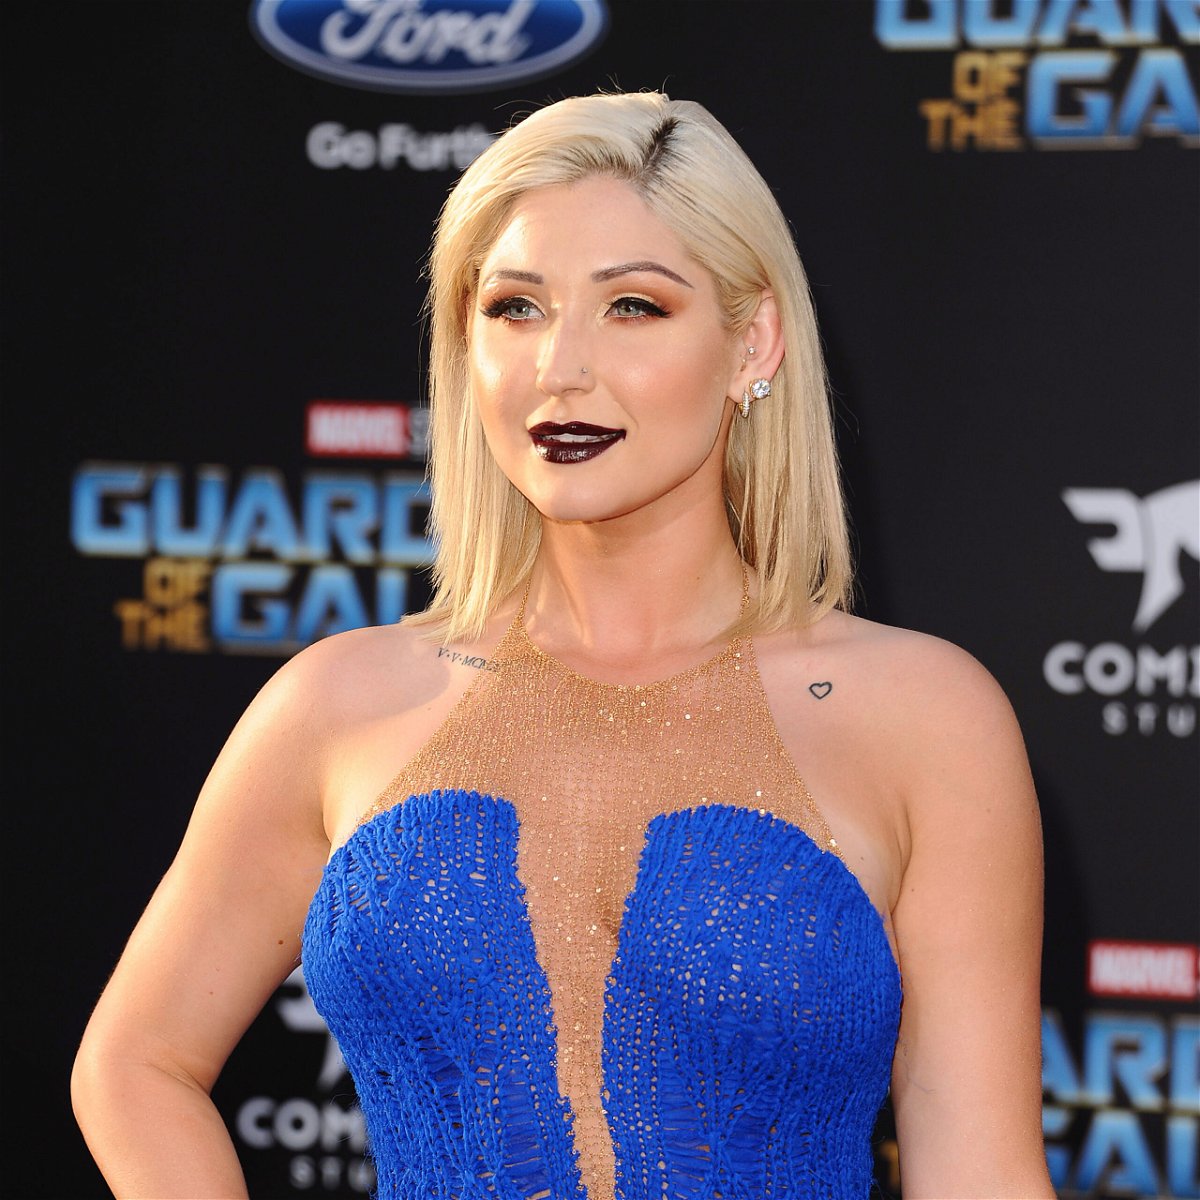 <i>Jason LaVeris/FilmMagic/Getty Images</i><br/>Taylor Ann Hasselhoff attends the premiere of 